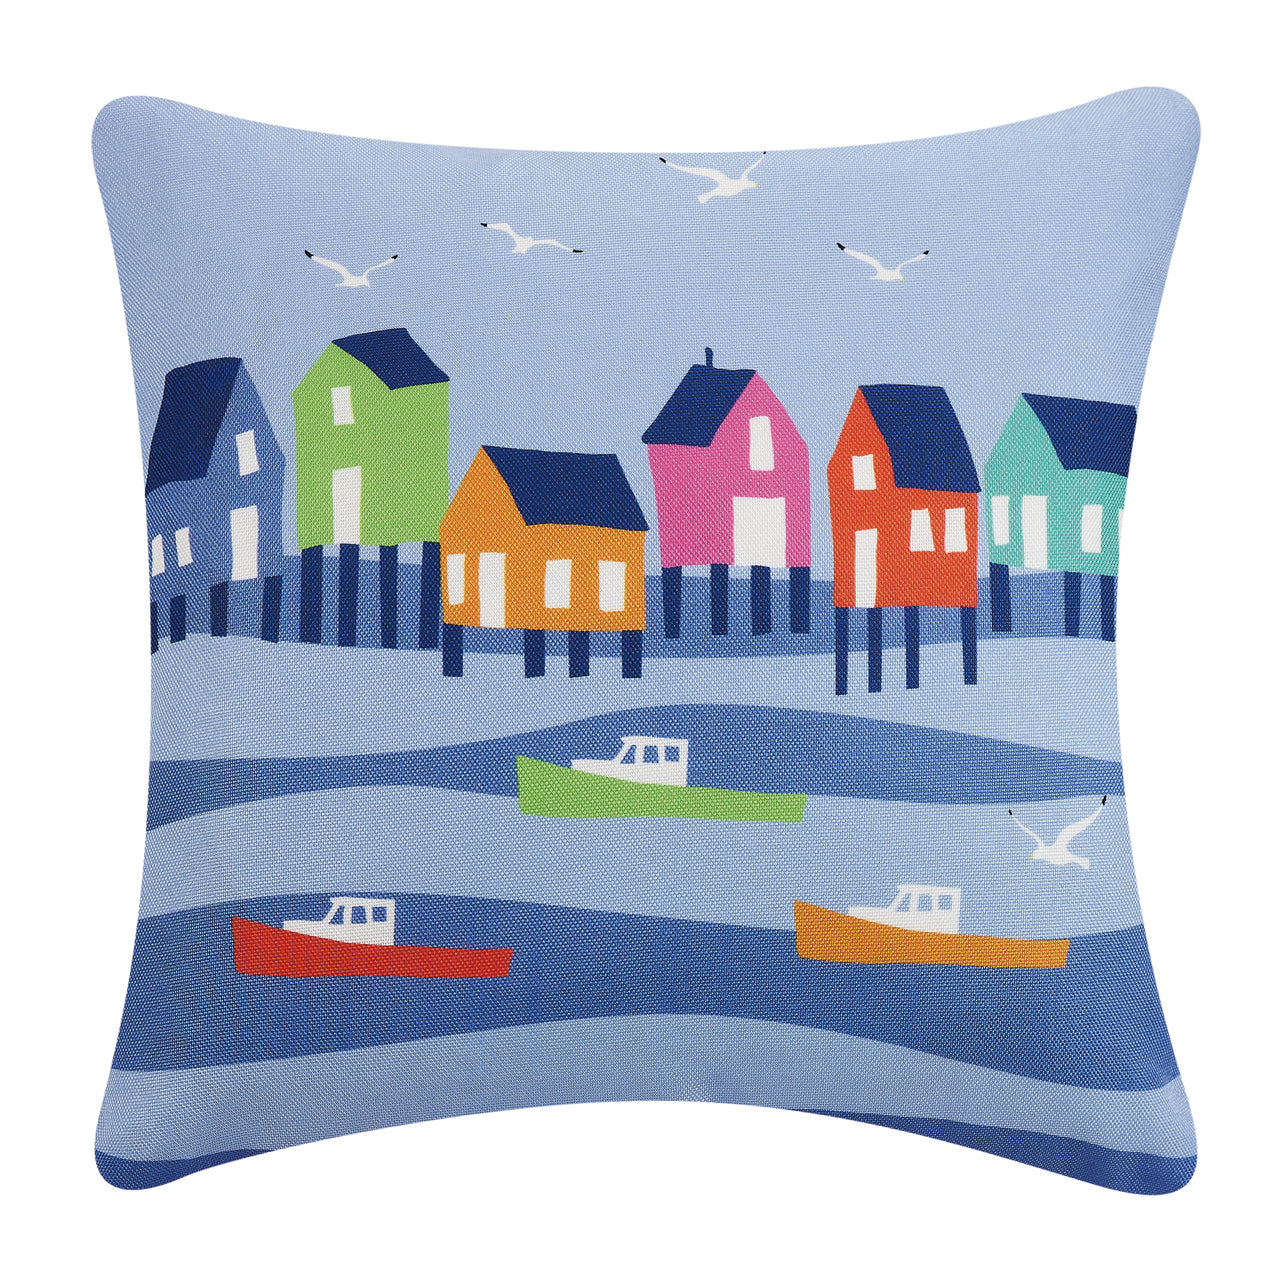 Lobster Cove House Digital Printed Pillow